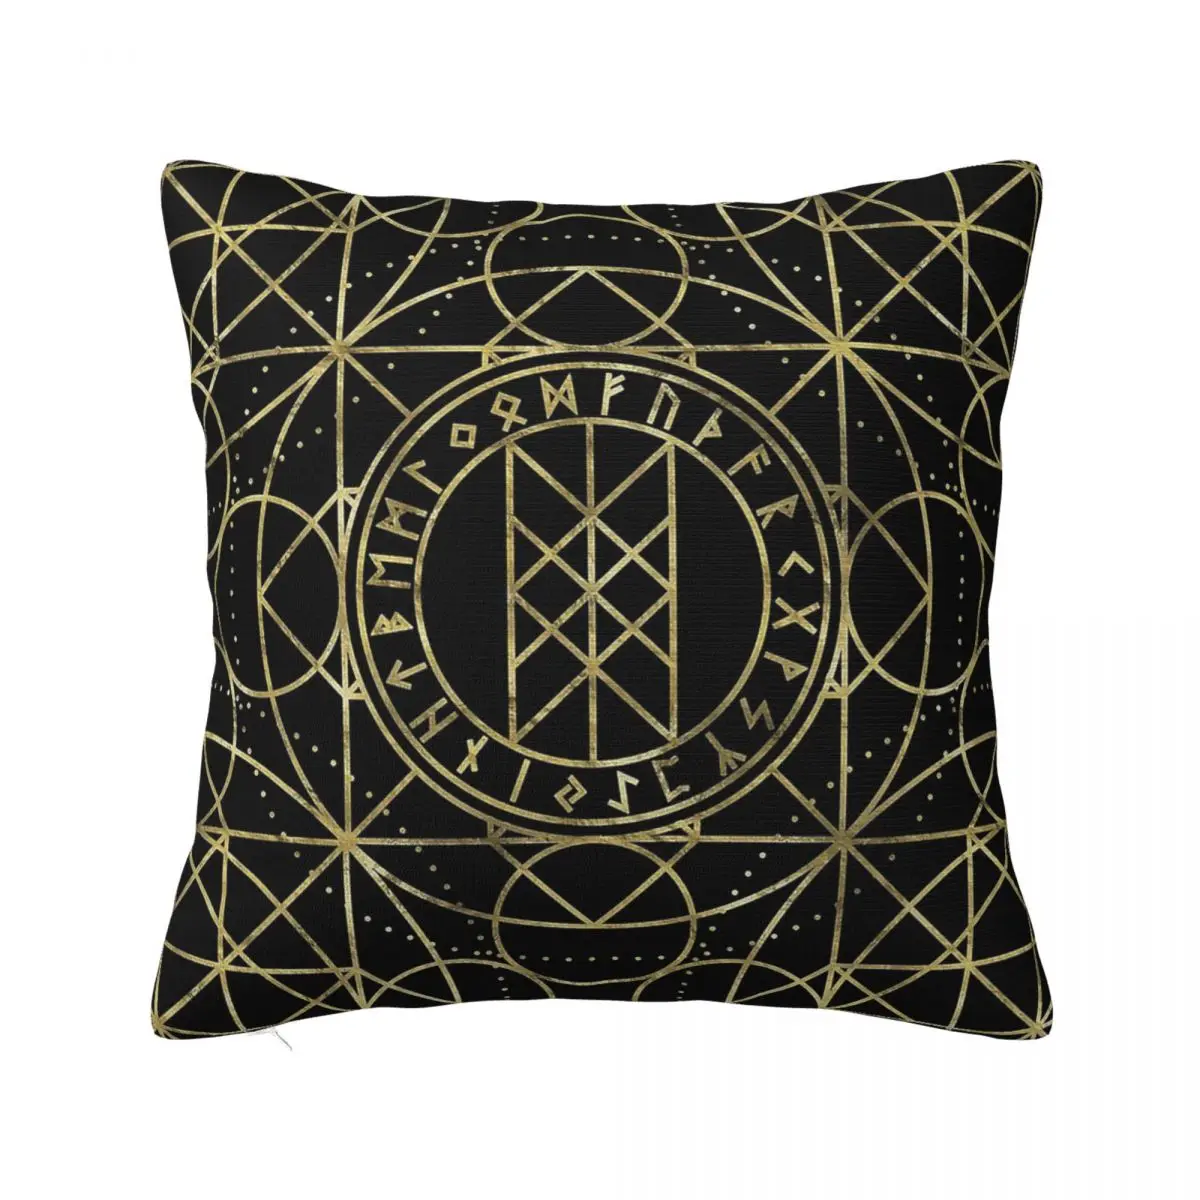 Web Of Wyrd The Matrix Of Fate vikings runes Soft Cushion Cover Decor Throw Pillow Case Cover for Home Double-sided Printing